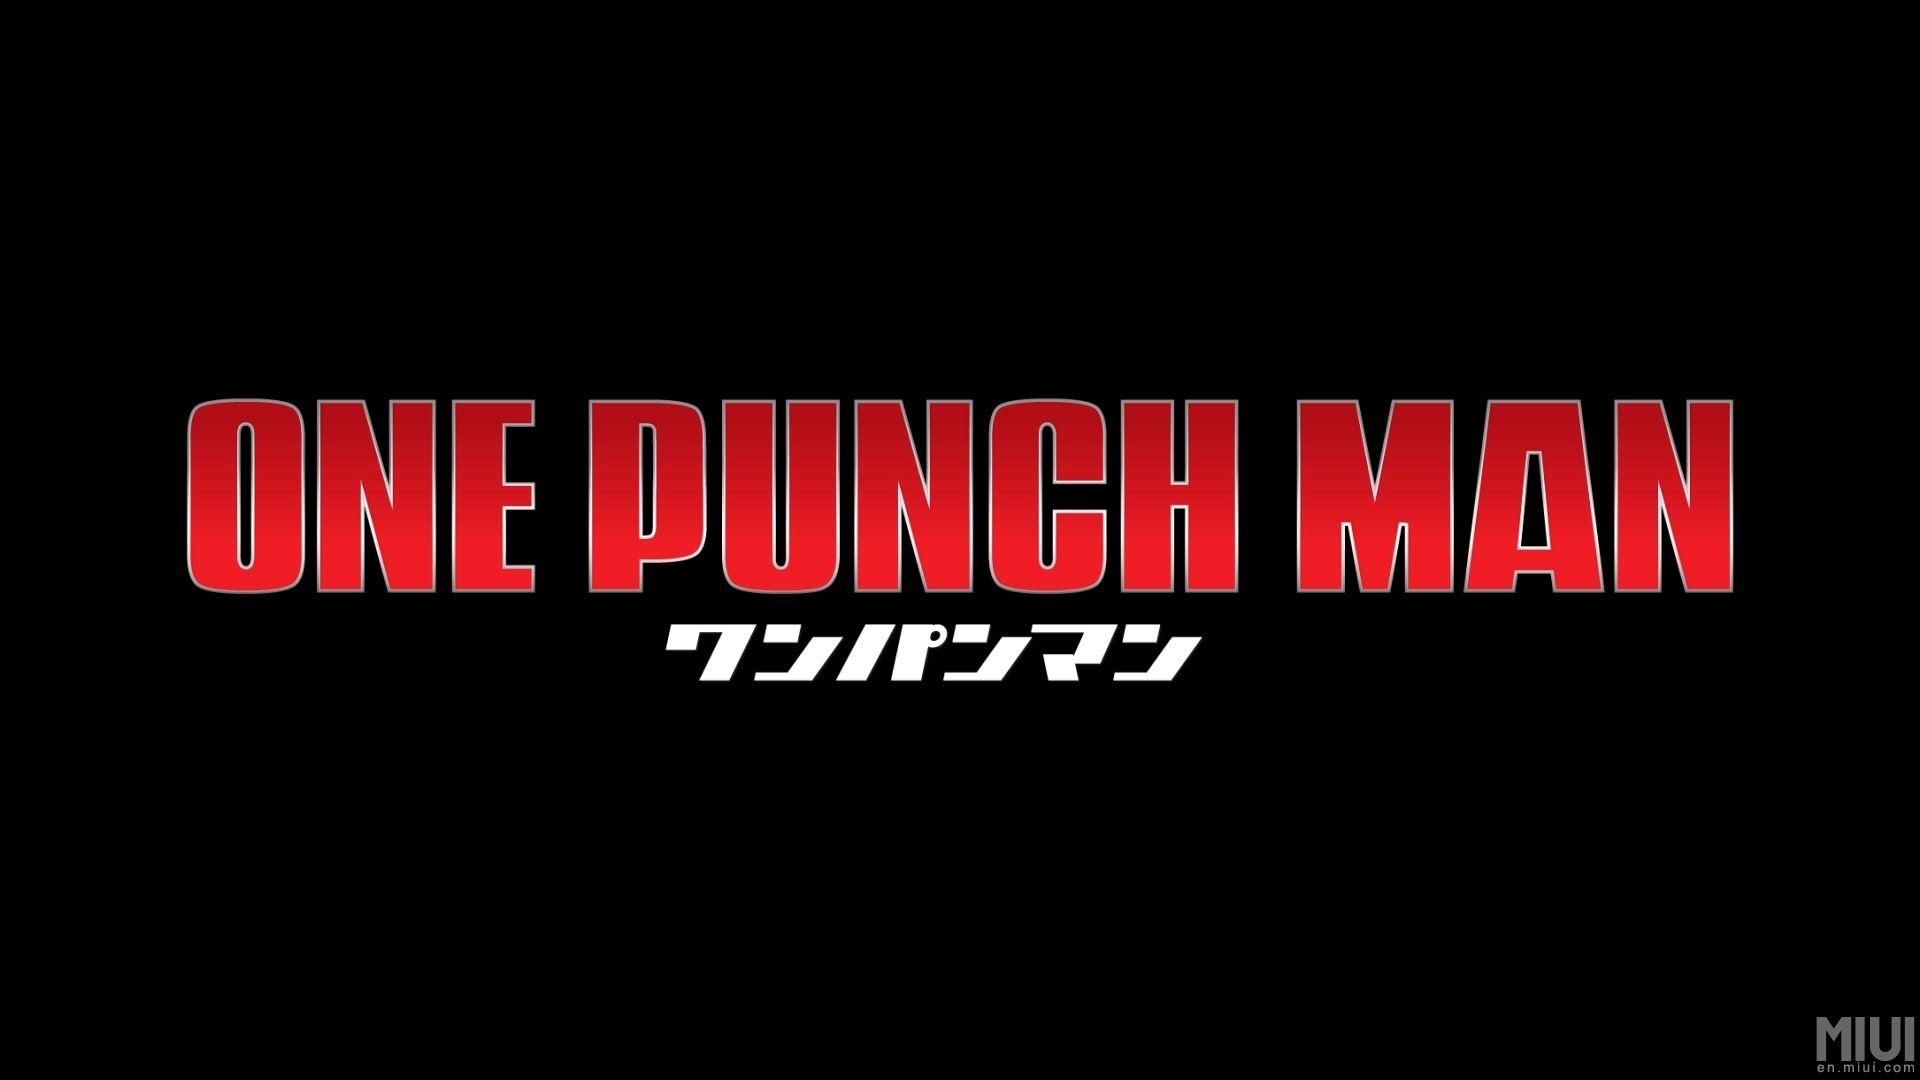 MIUI Resources Team One Punch Man HD Wallpaper